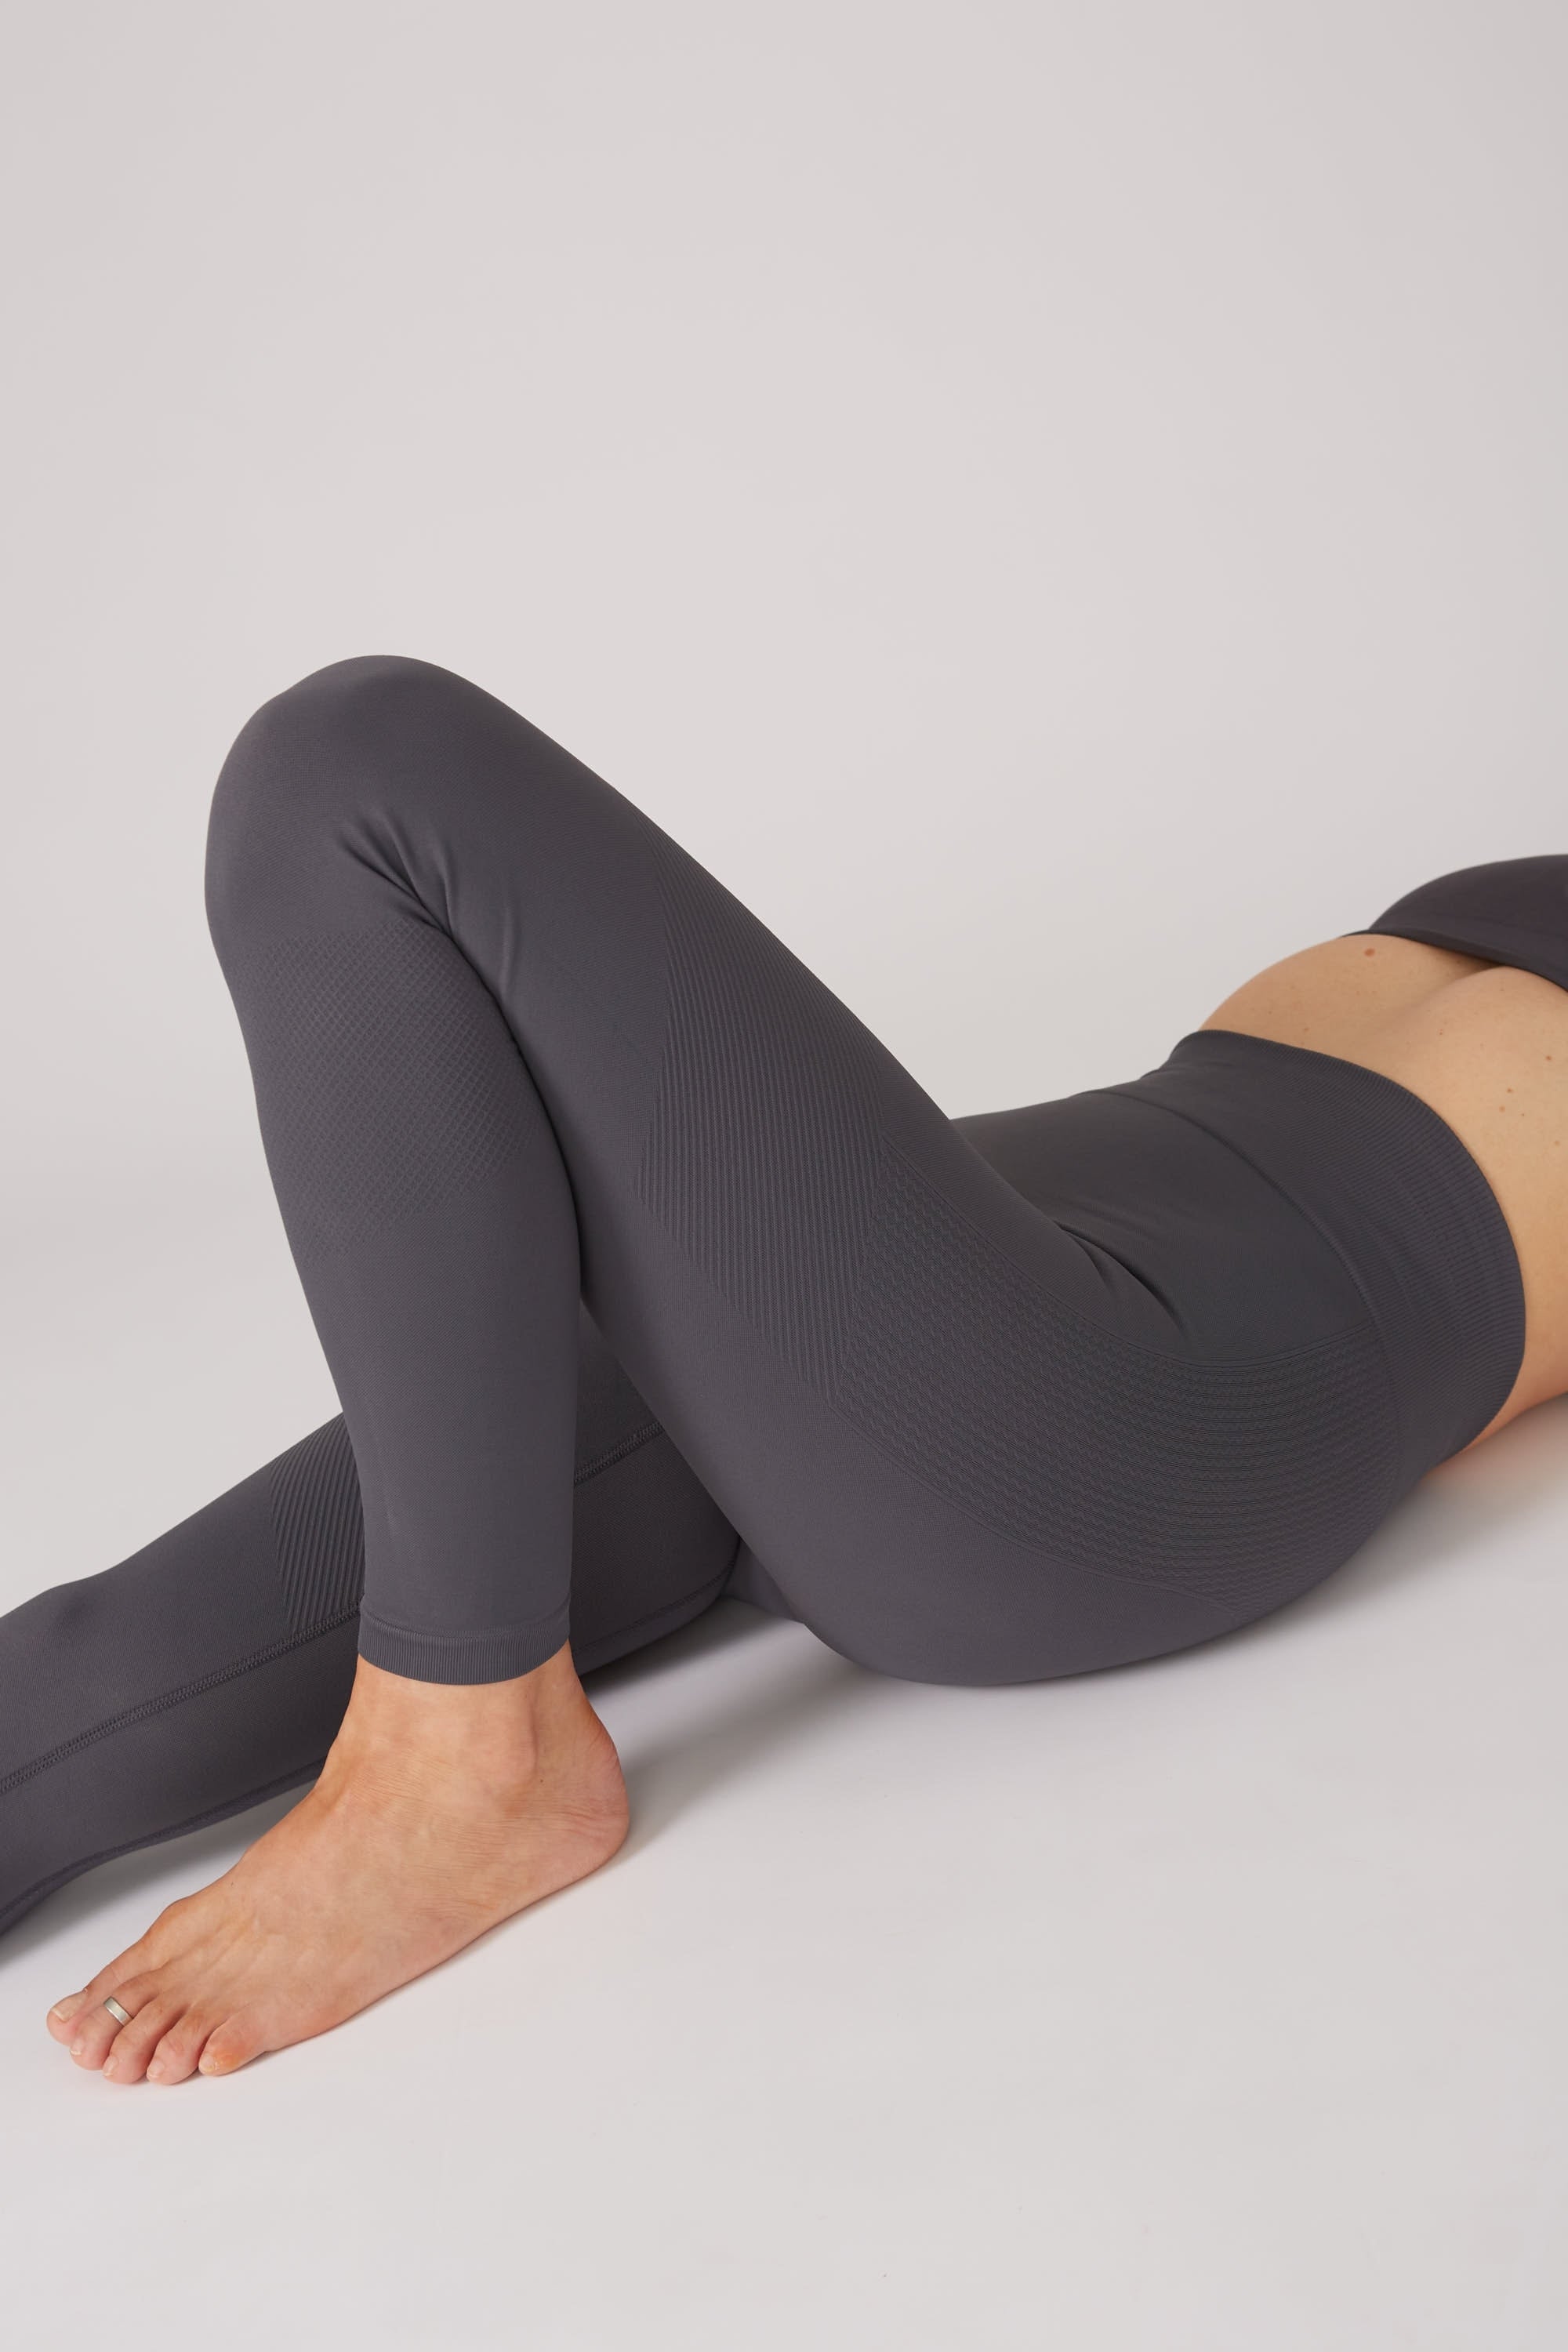 Model wearing grey leggings and grey supportive sports bra for sustainable activewear brand, Jilla.